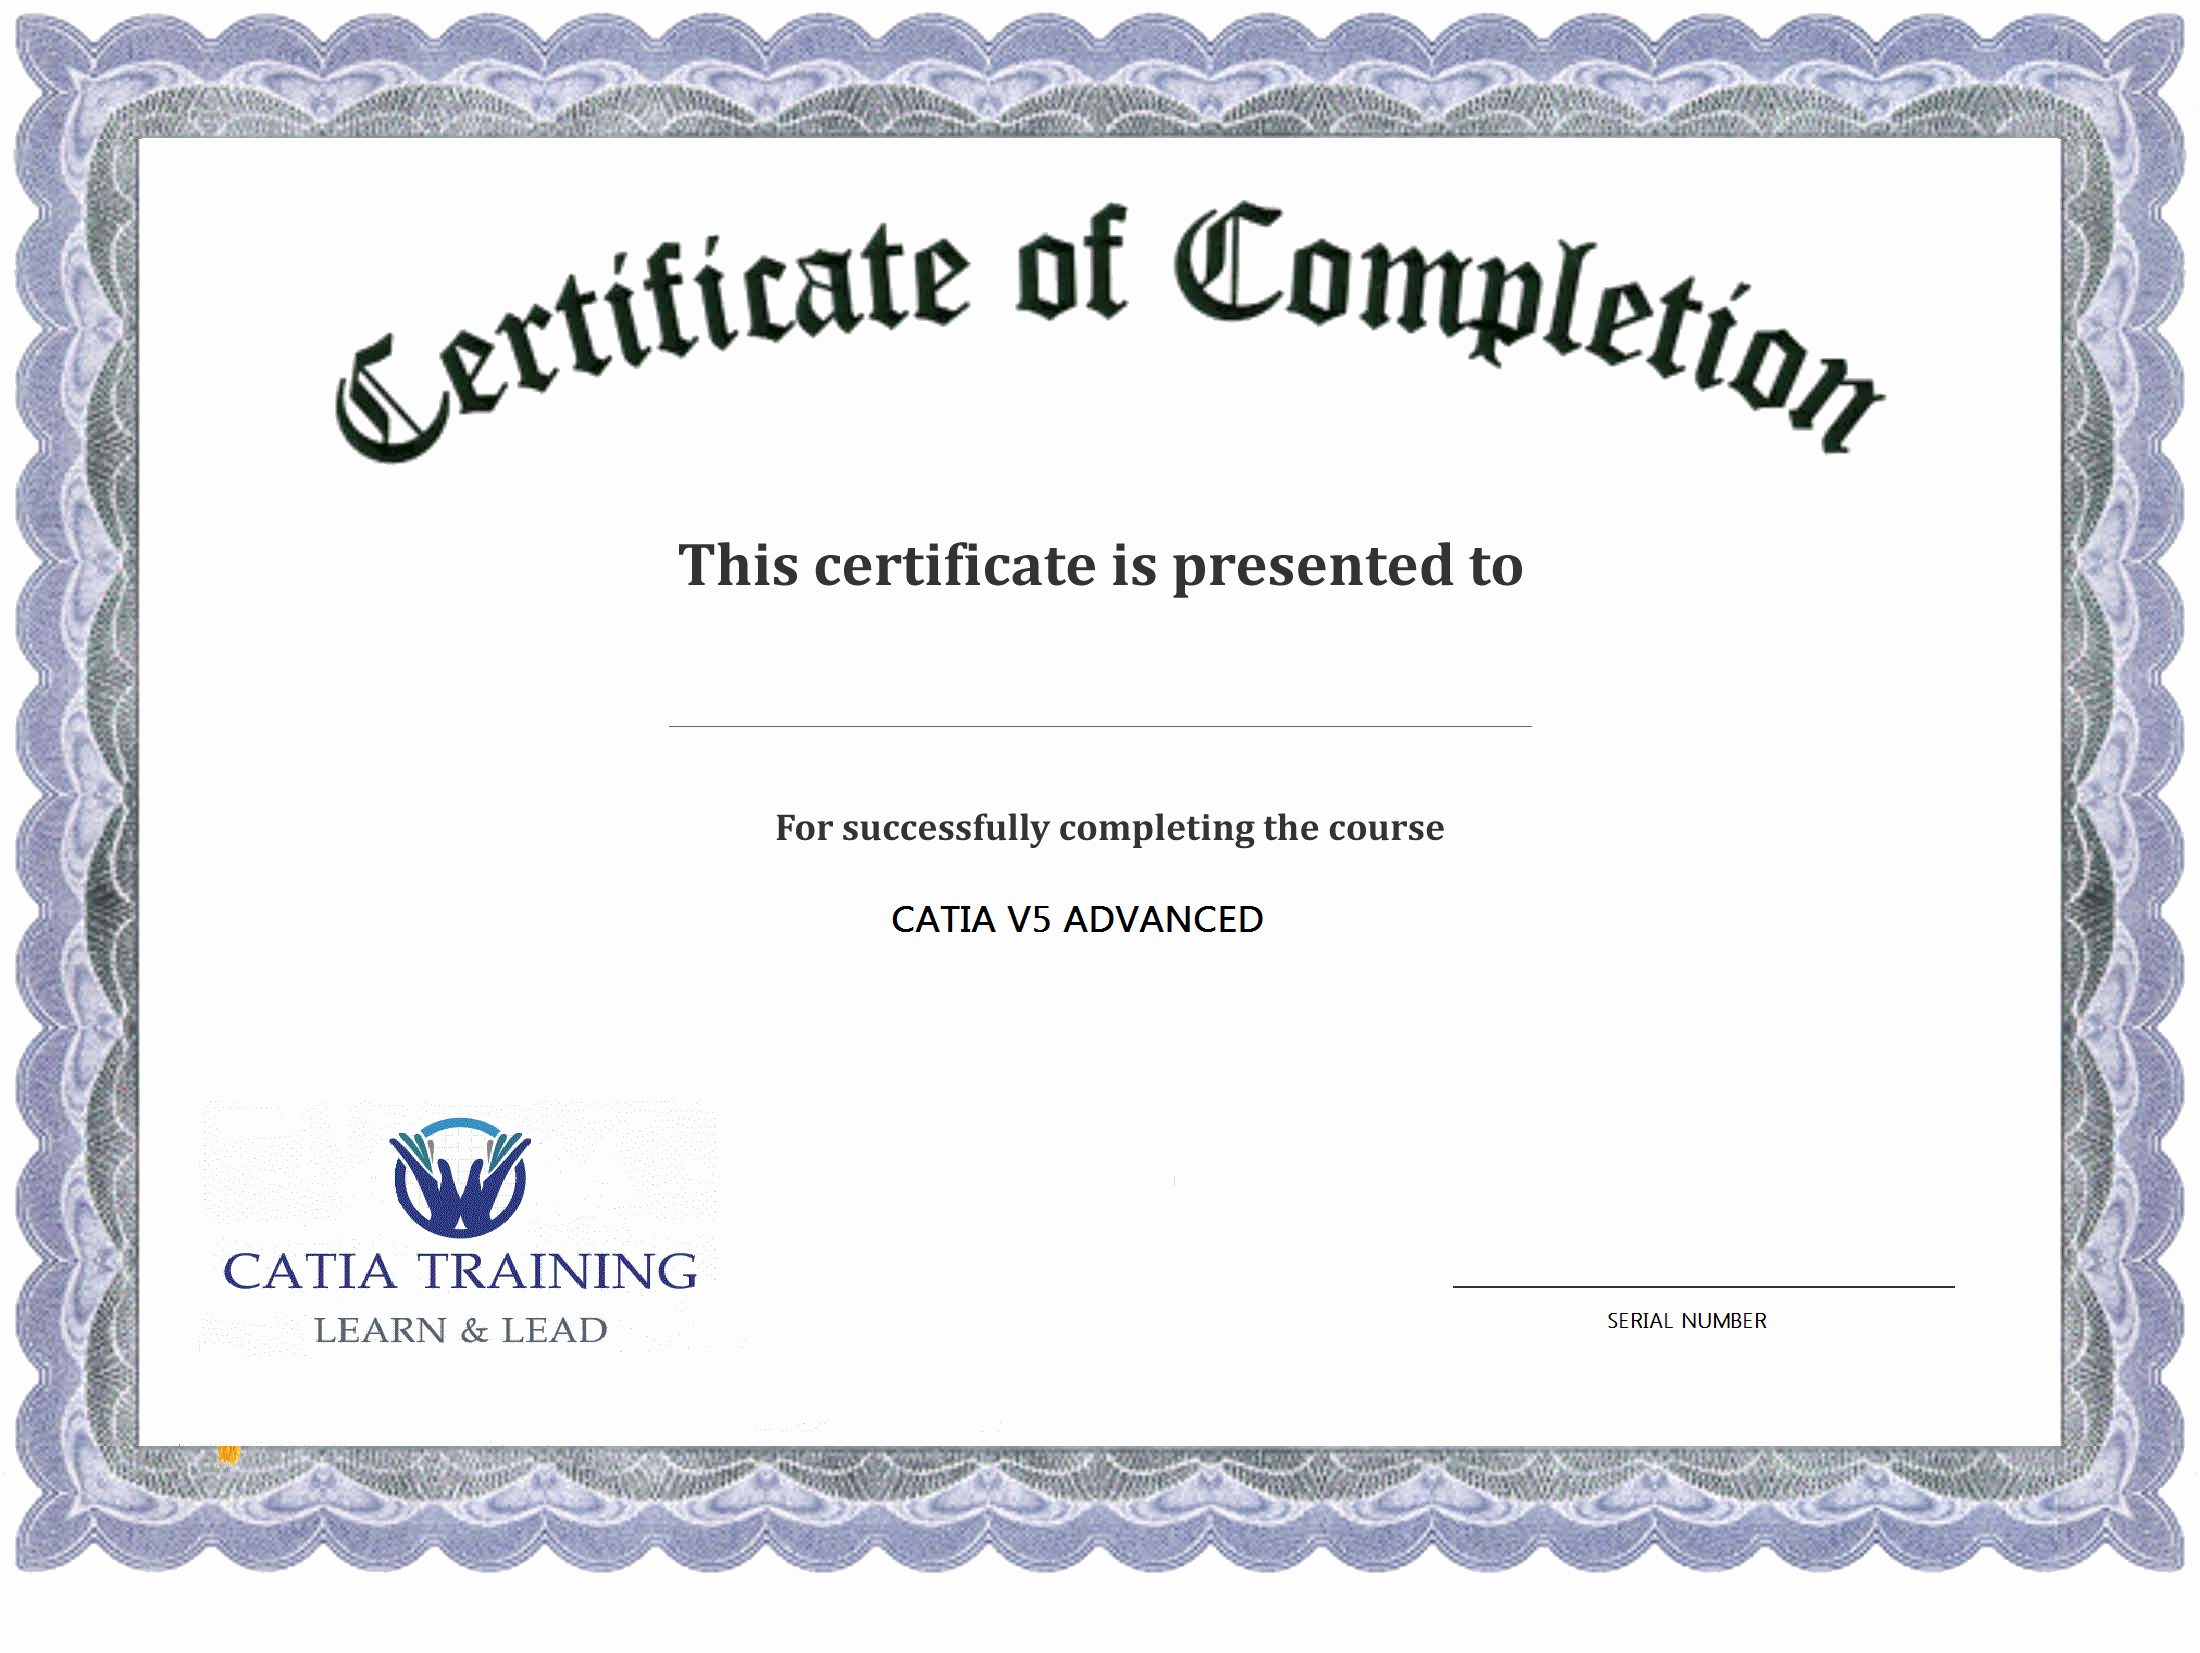 Blank Certificate Of Completion Template Awesome 13 Certificate Of Pletion Templates Excel Pdf formats